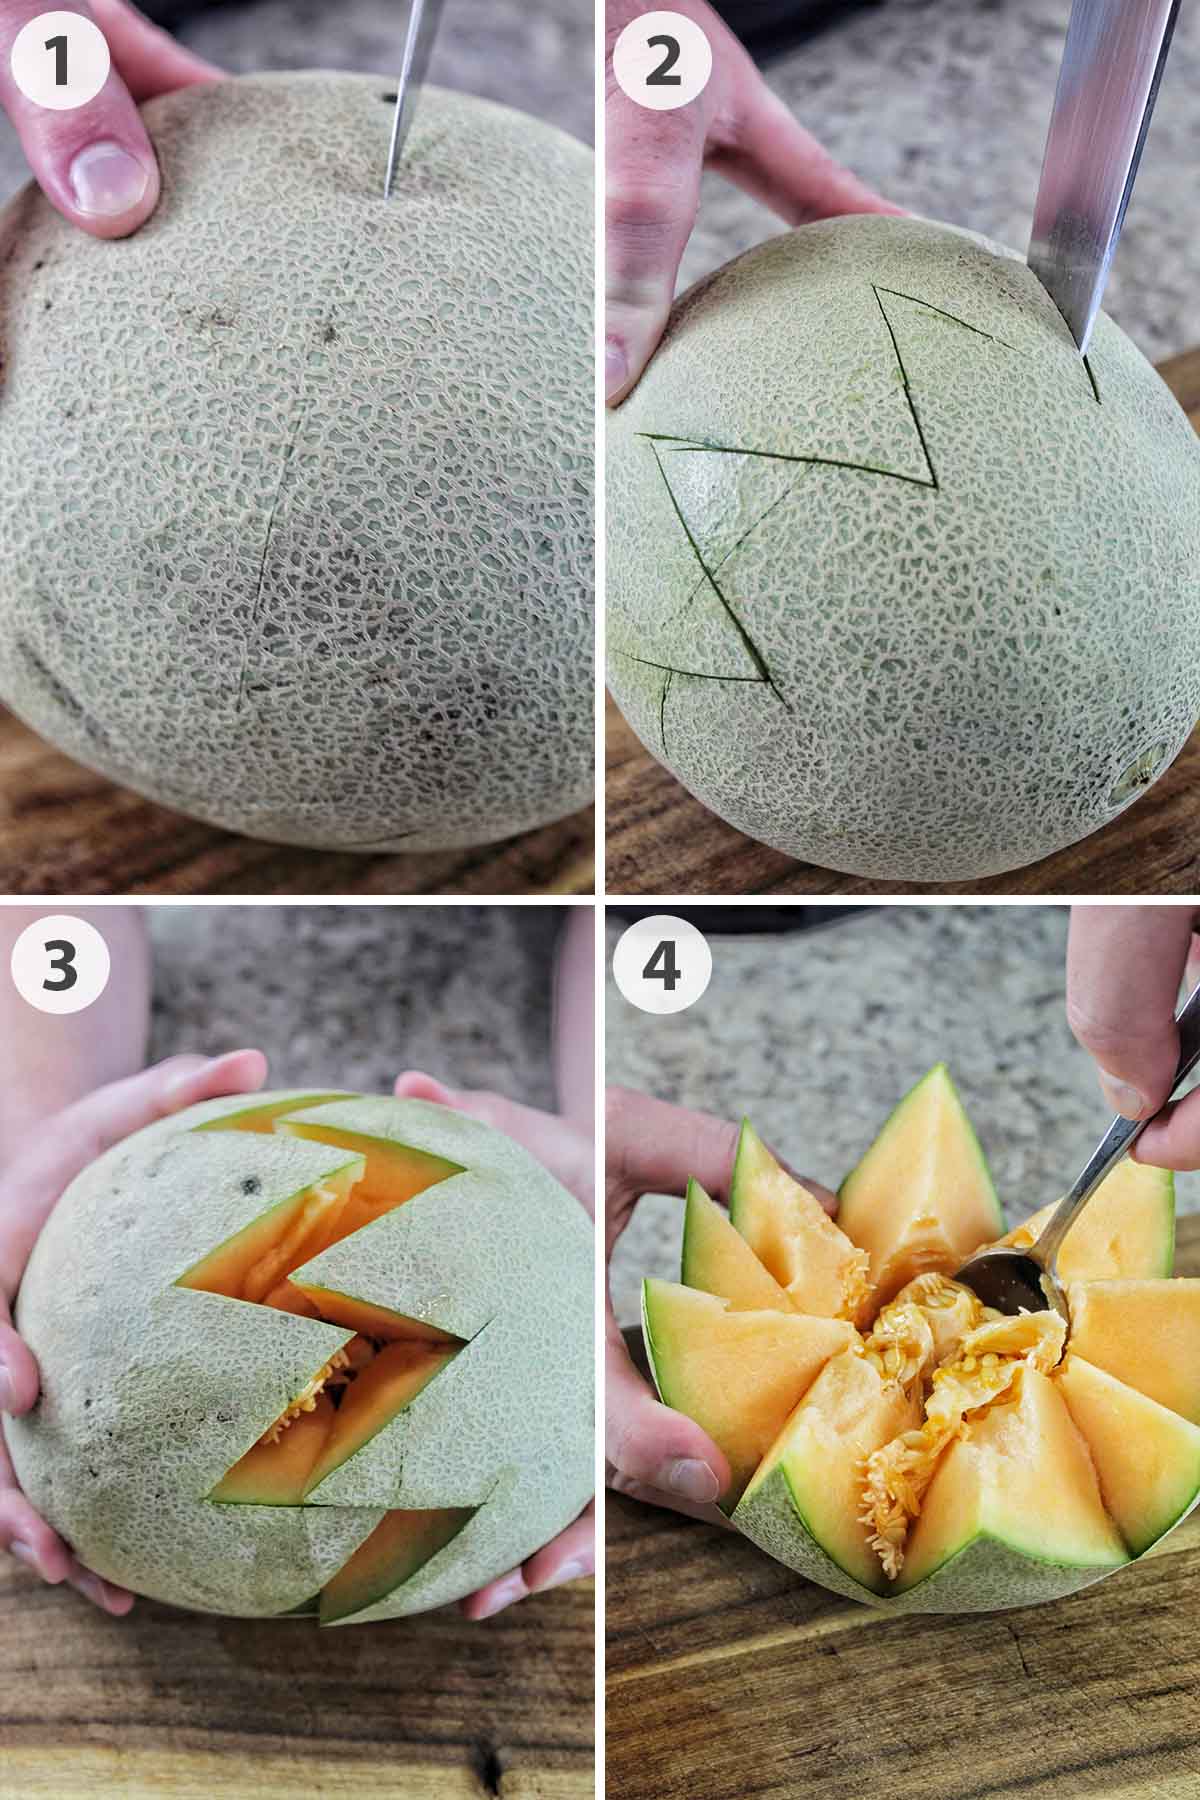 four numbered photos showing how to cut a cantaloupe flower.